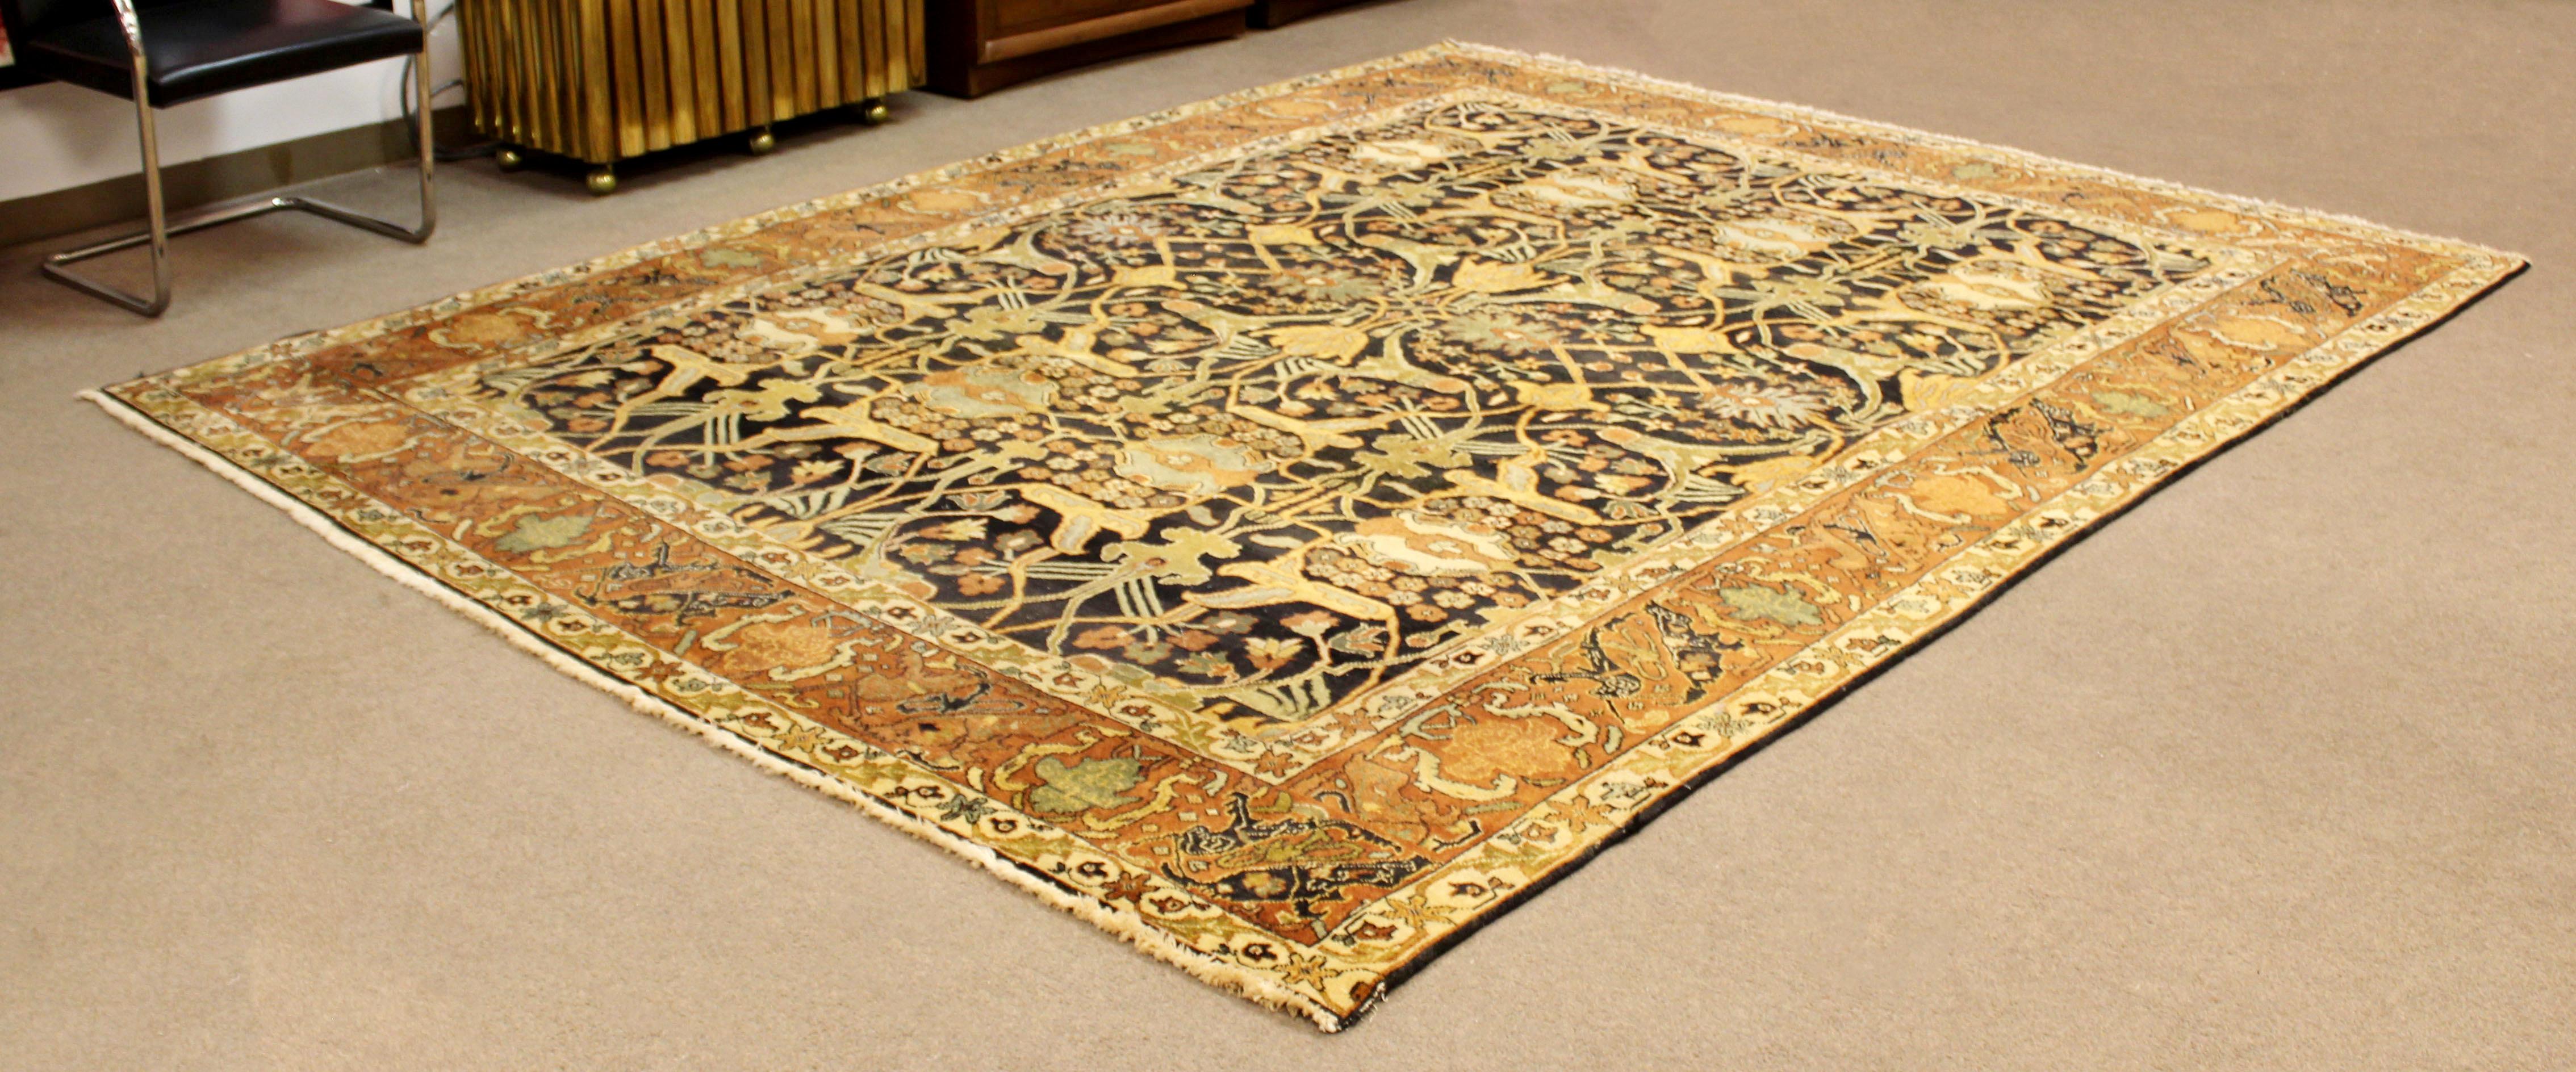 For your consideration is a stunning, rectangular area rug or carpet, made of 100% wool in India. In very good condition. The dimensions are 132